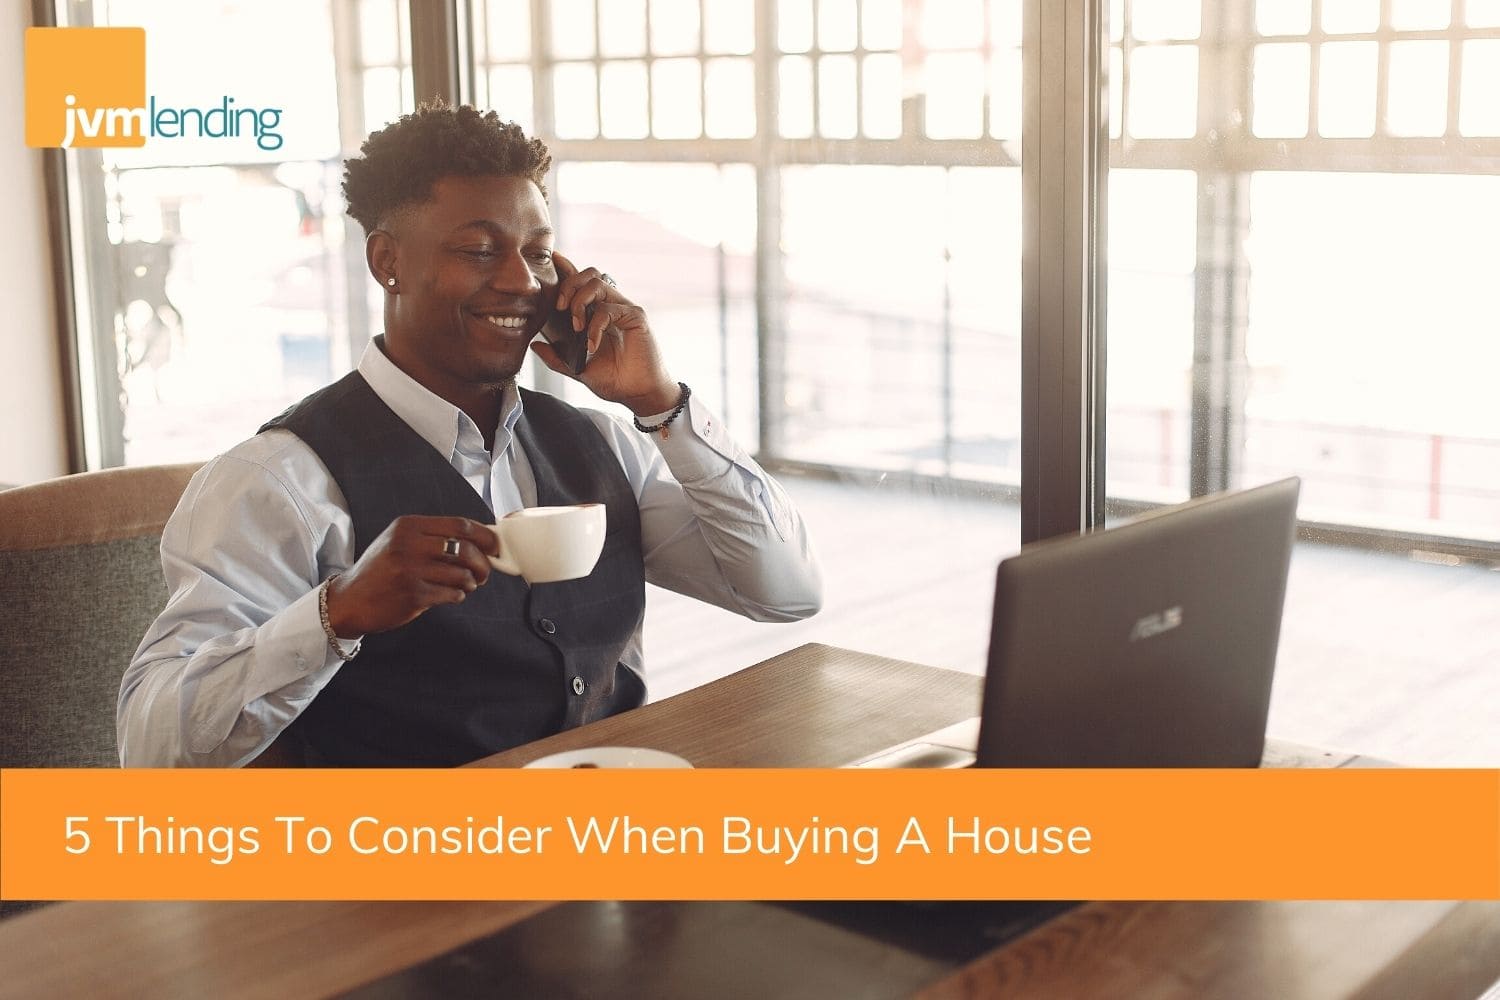 A homebuyer is on the phone with a mortgage analyst while looking up the 5 things every buyer should consider when purchasing a home.